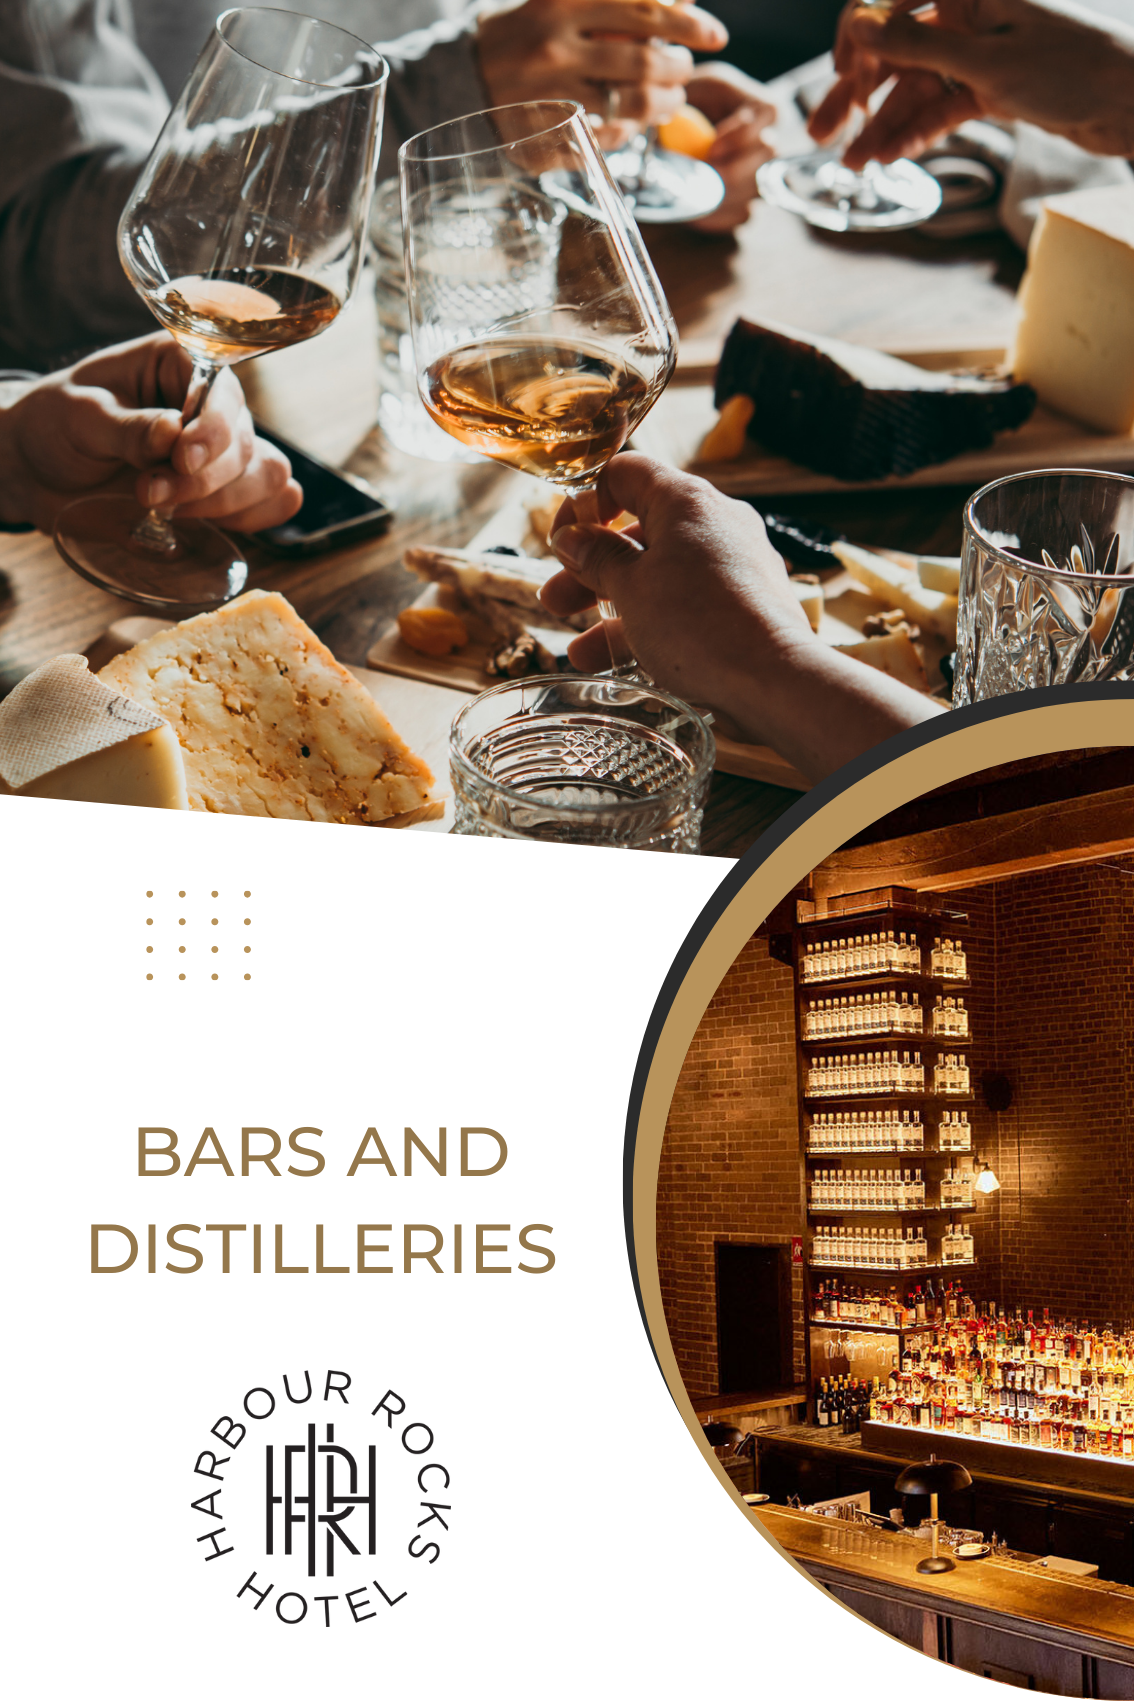 Bars and distilleries 